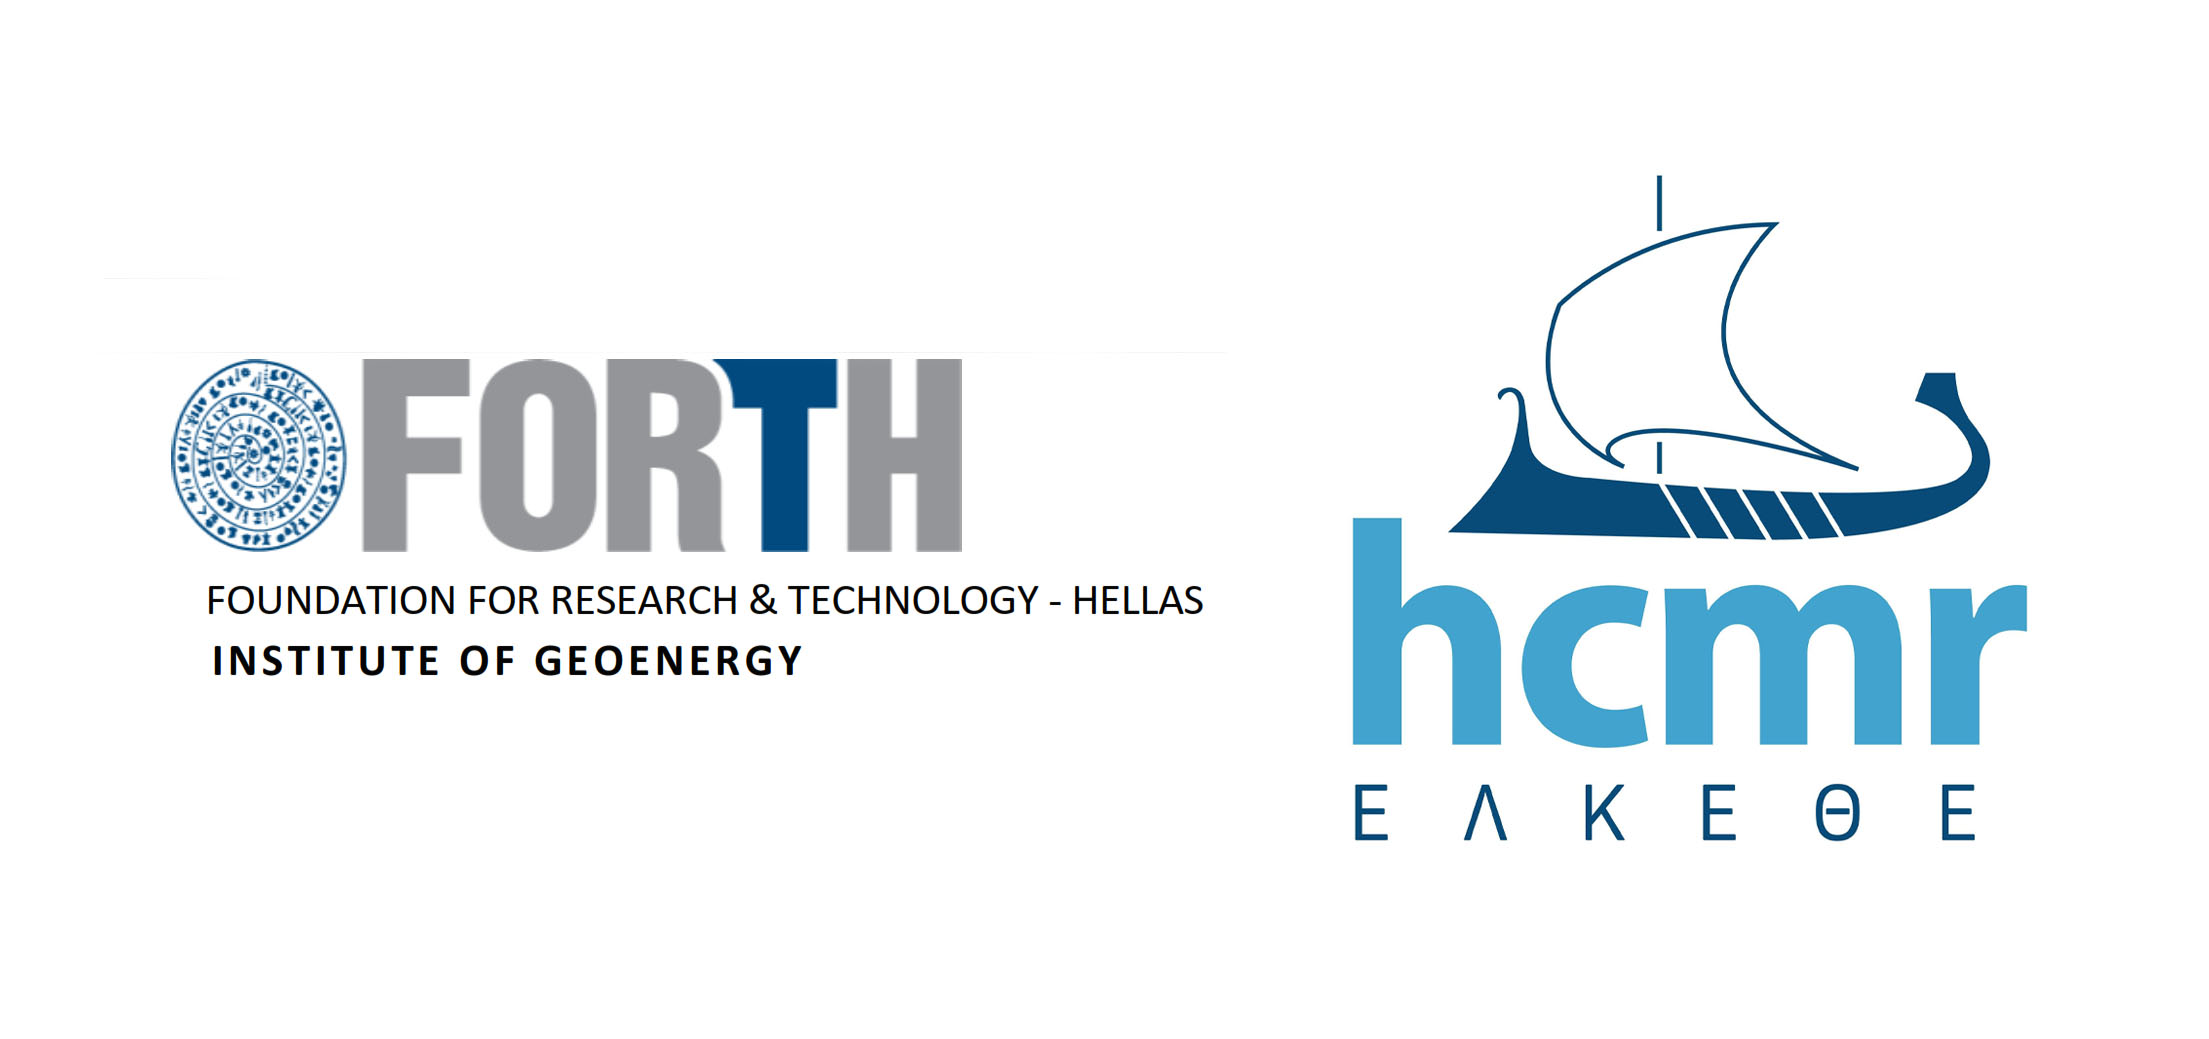 The Institute of Geoenergy of the Foundation for Research and Technology – Hellas (IG/FORTH) and the Hellenic Center for Marine Research (HCMR)